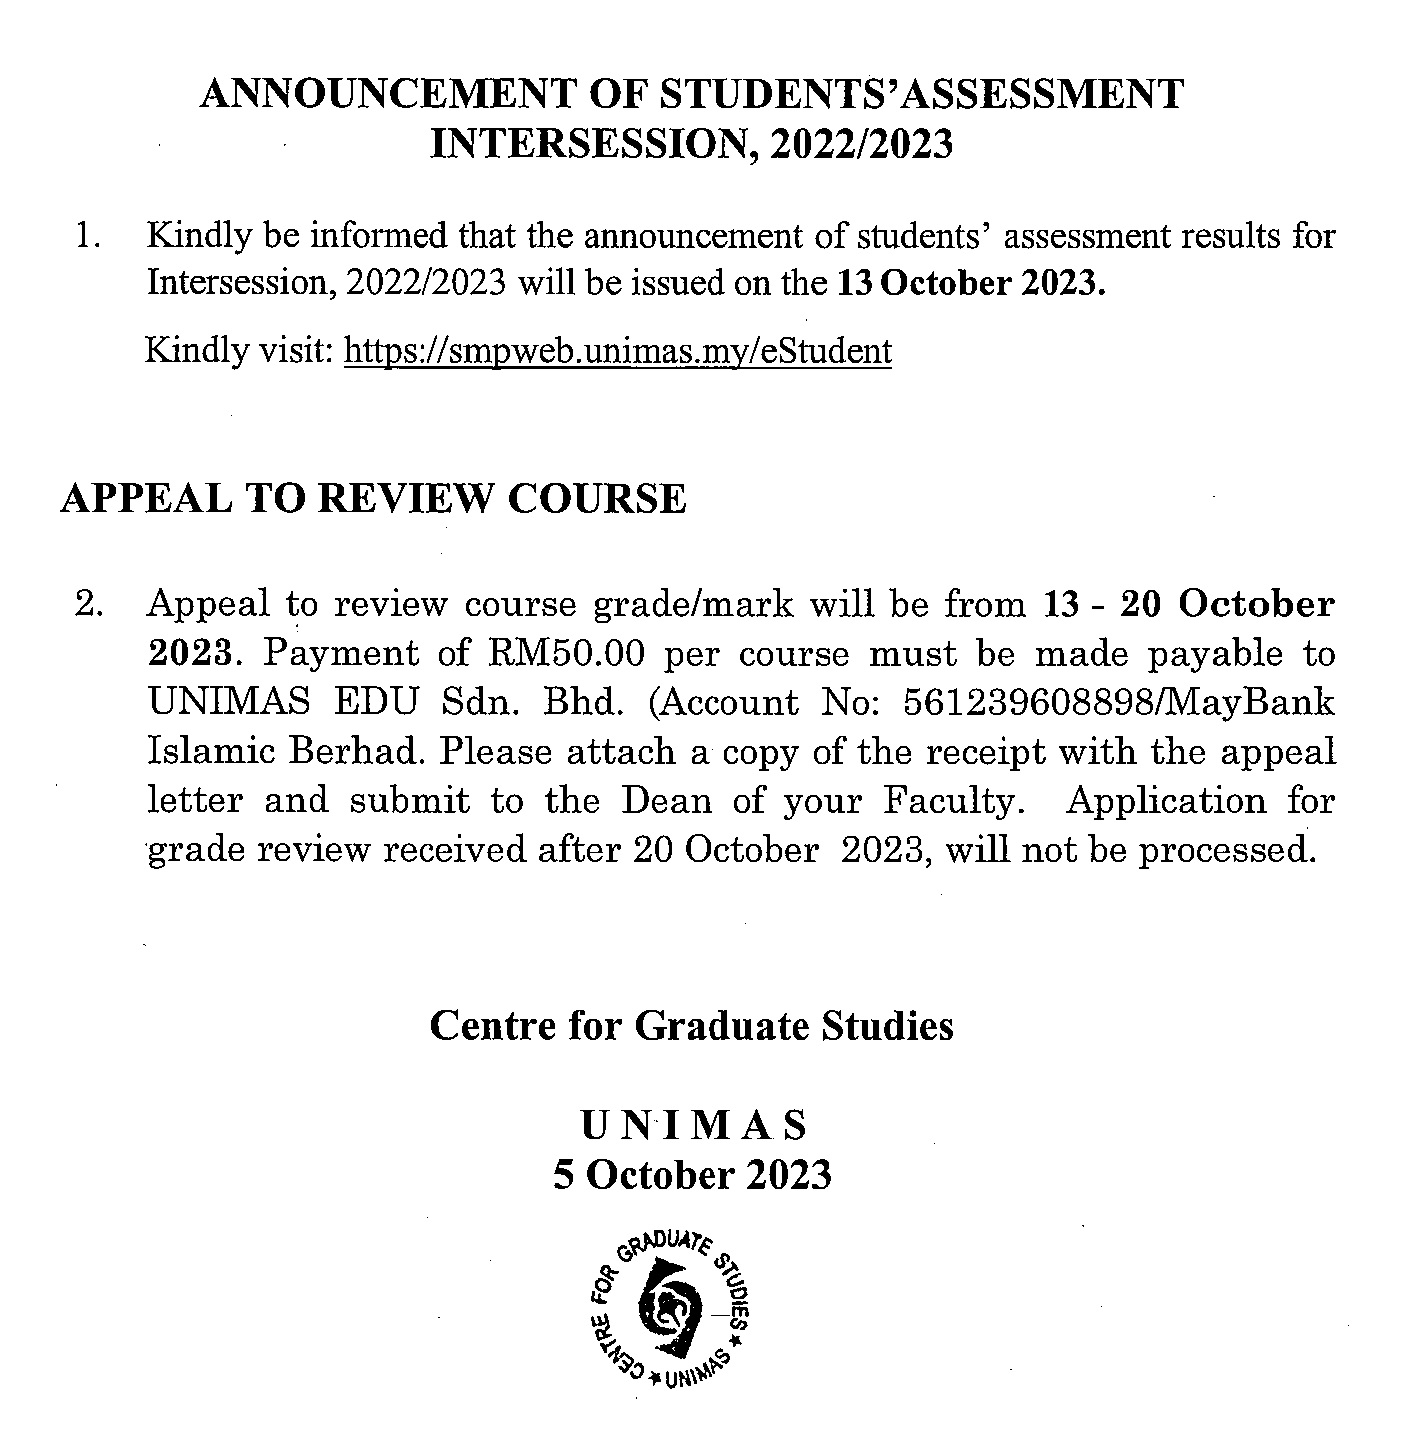 ANNOUNCEMENT OF STUDENTS' ASSESSMENT INTERSESSION 2022_2023.jpg